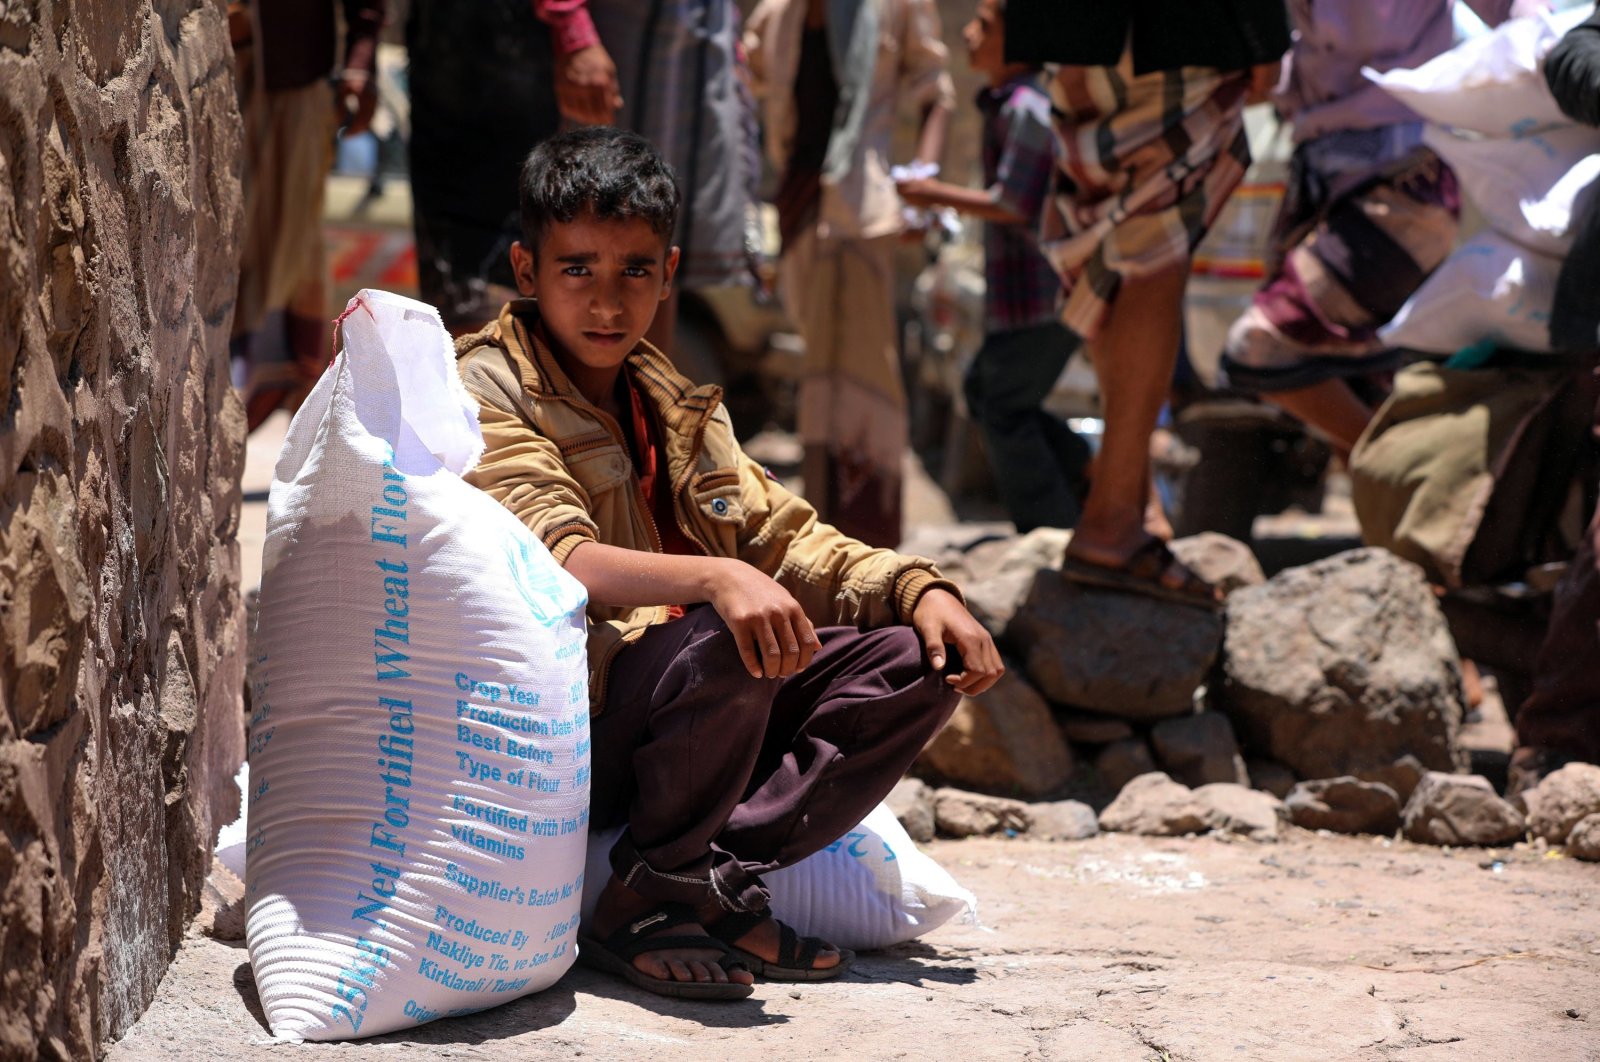 A Yemeni boy receives humanitarian aid donated by the World Food Programme (WFP) in the country's third-largest city of Taiz, Yemen, Oct. 10, 2020. (AFP Photo)